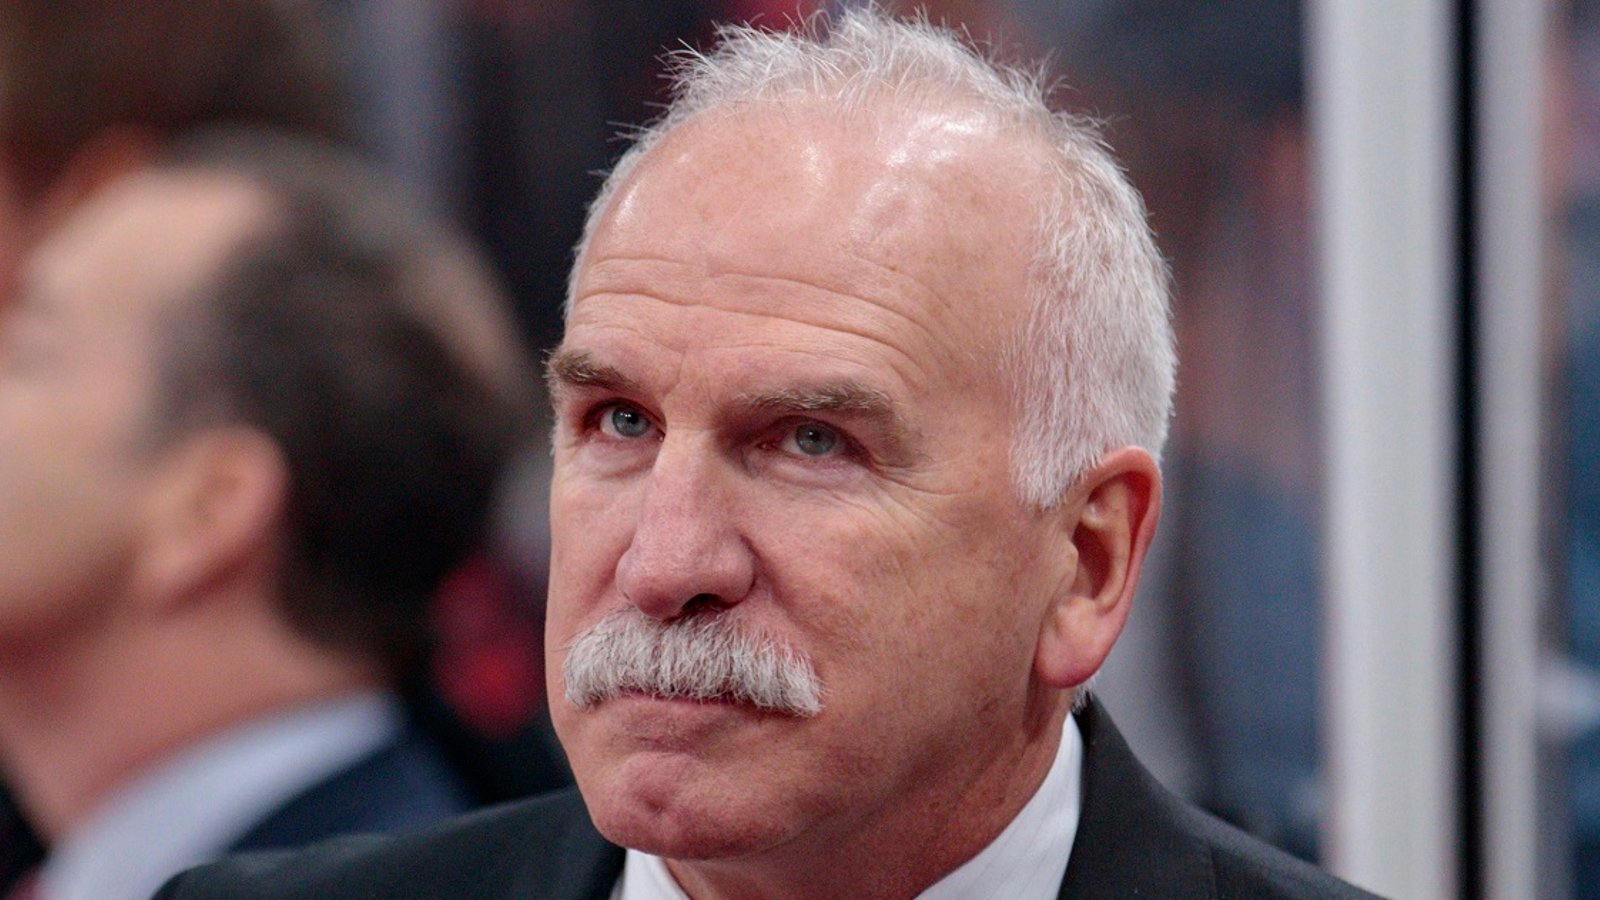 Joel Quenneville says he needs Bobrovski to be “great” in the playoffs.